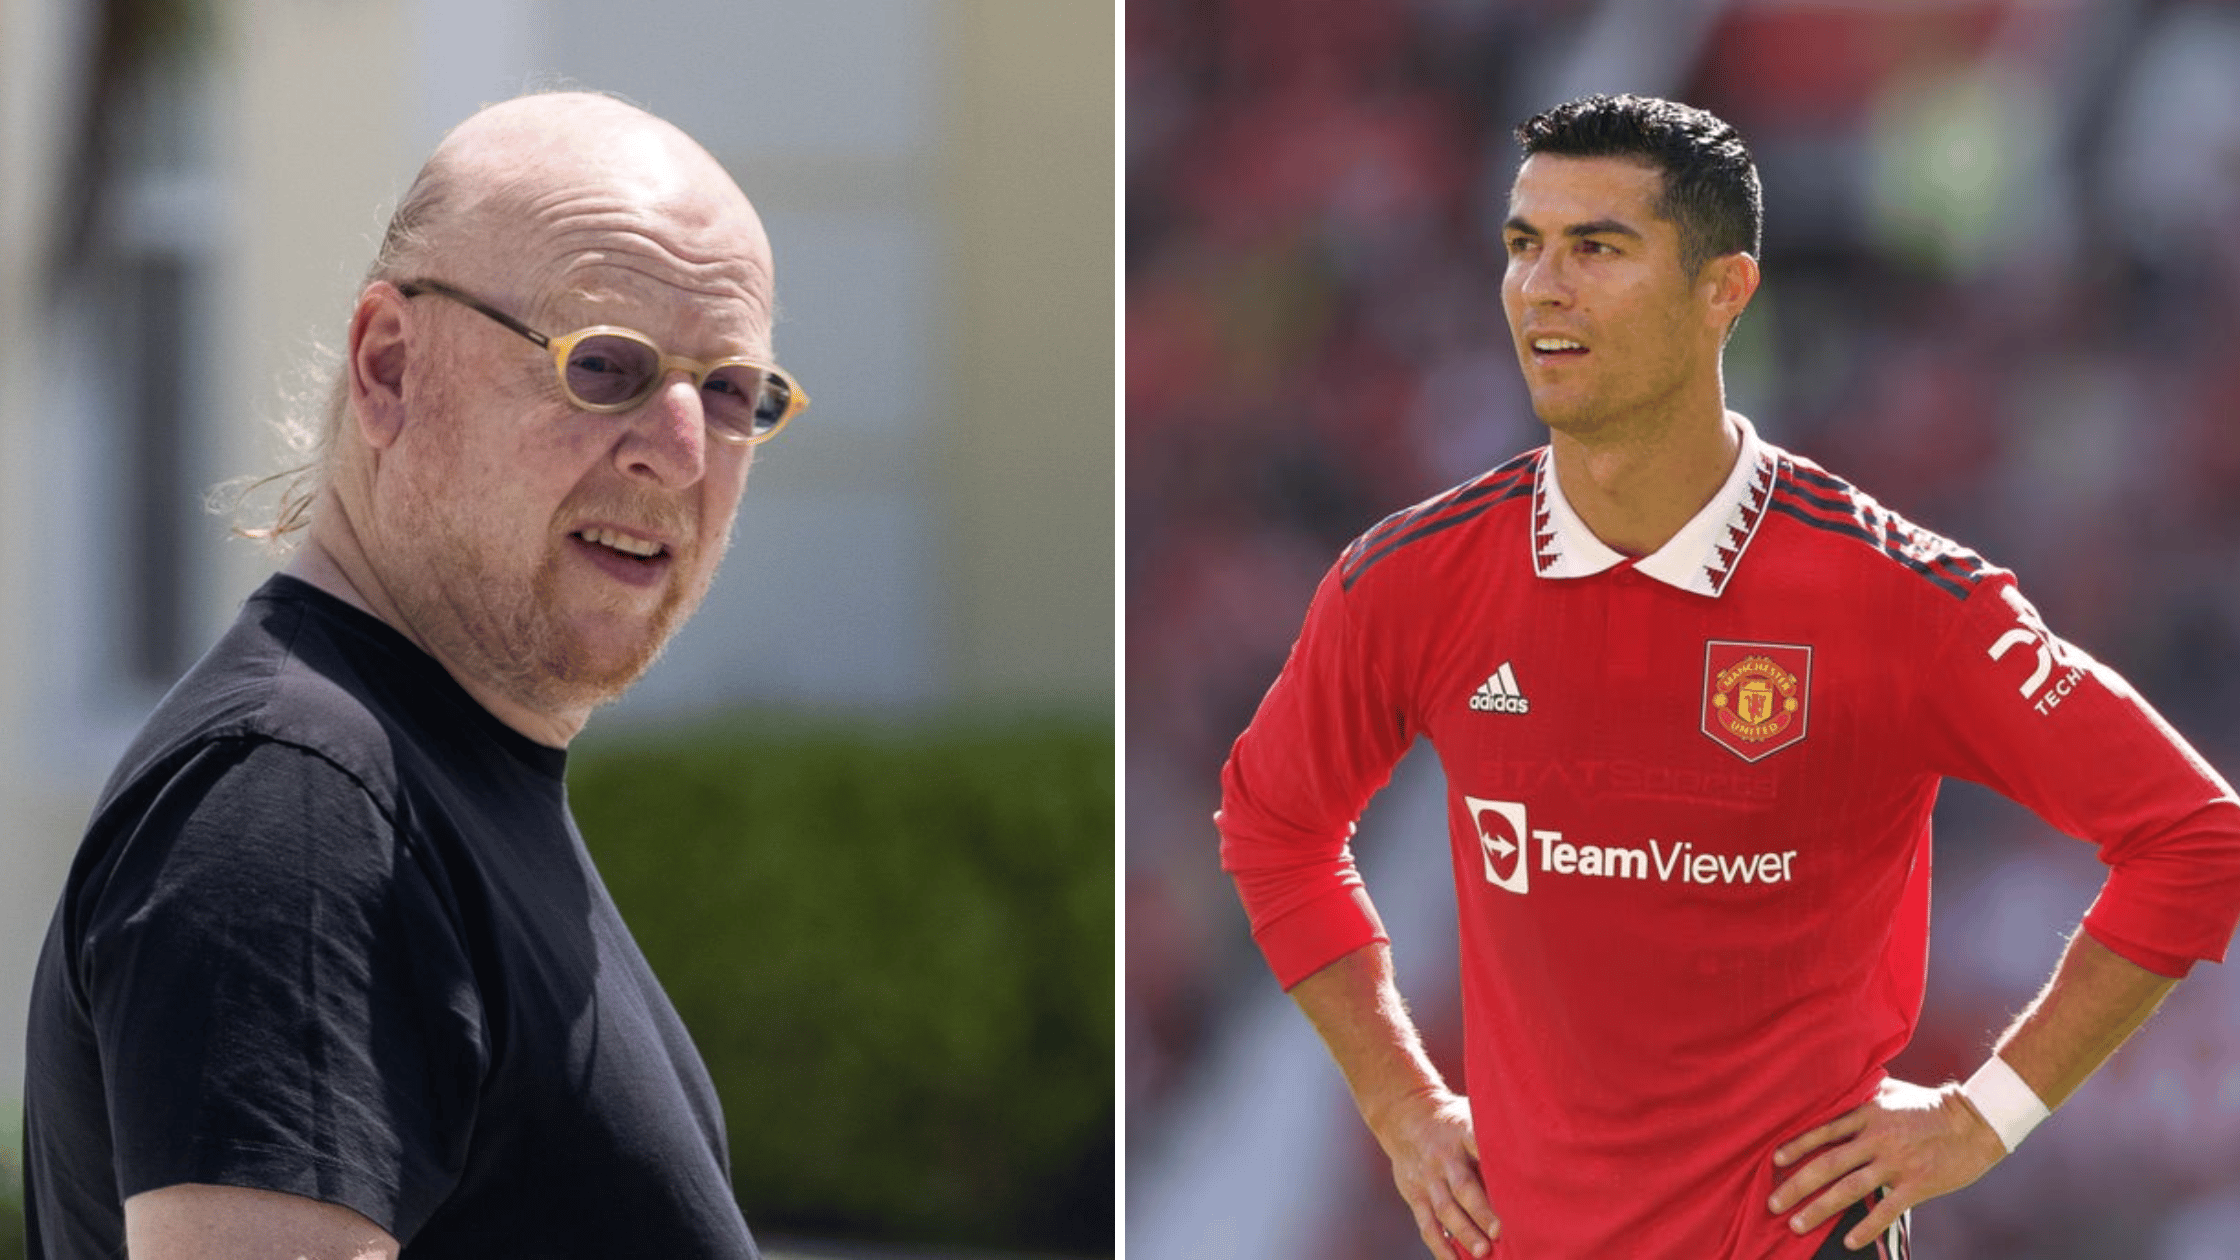 Following Ronaldo's contract termination, Man United co-owner speaks out